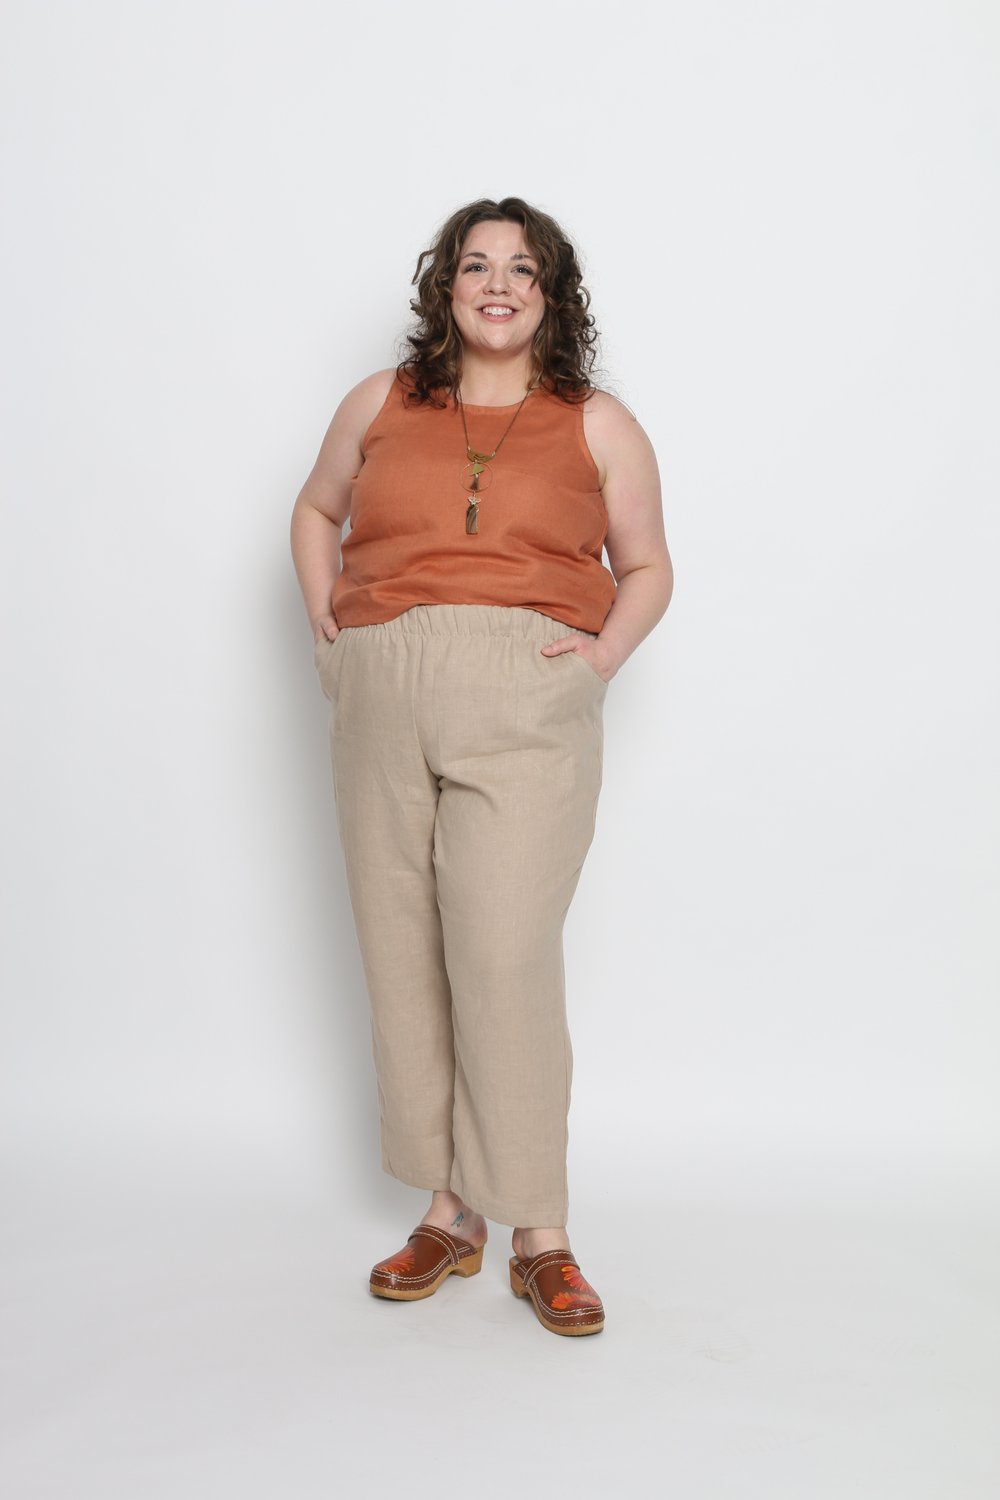 Amber is wearing an XL. Her measurements are: Height 5'7" | Bust 49" | Waist 47" | Hip 53"